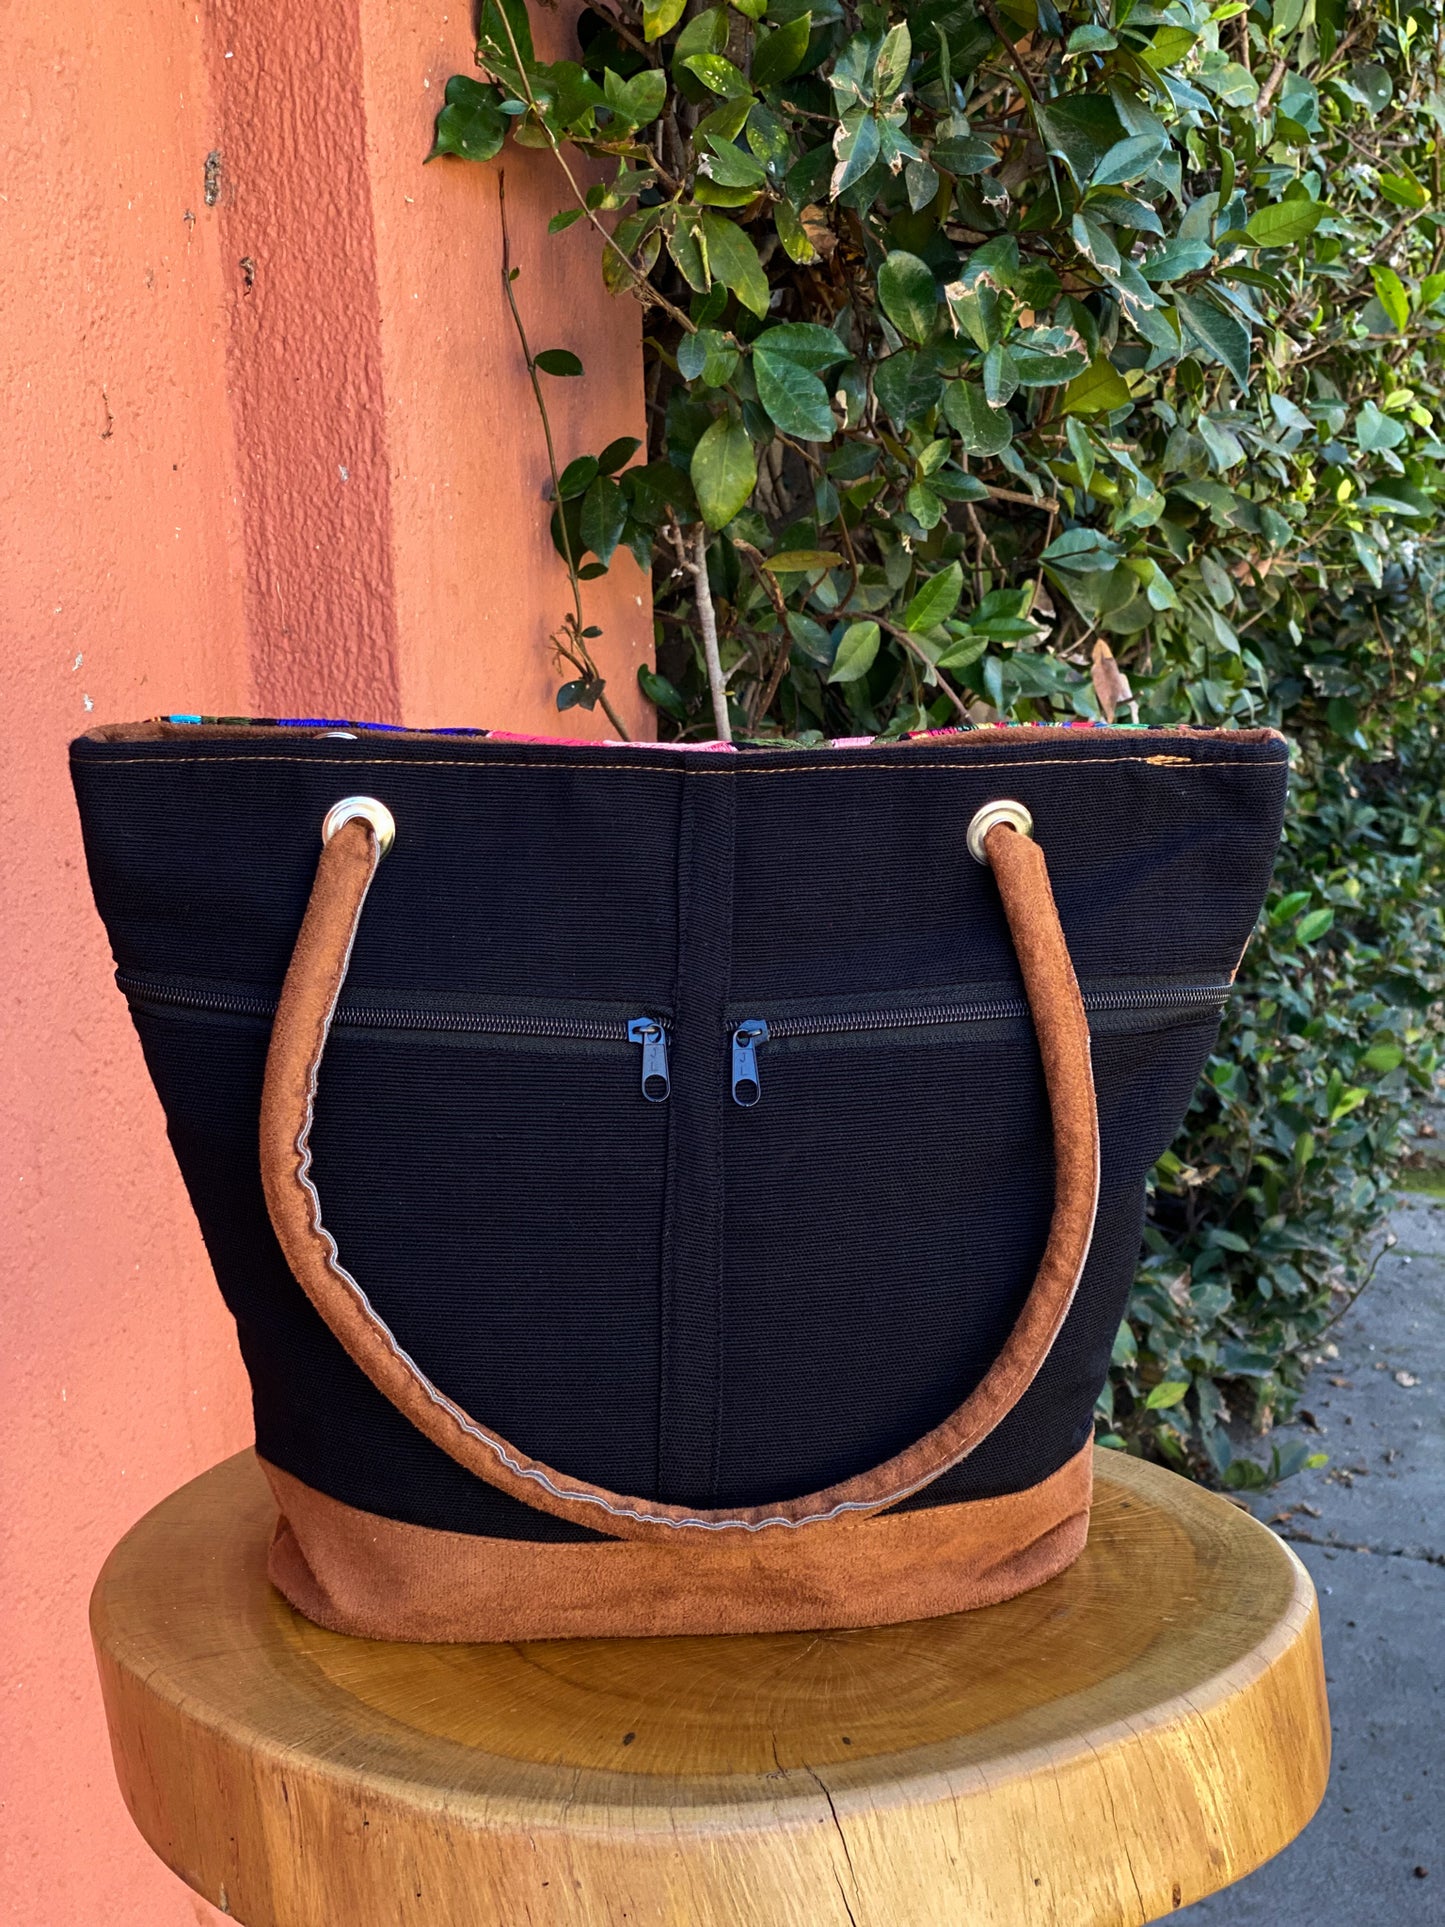 Handwoven Intricate Fabric  Canvas Fabric  Faux Leather Straps Inner Zipper Pocket Made in Guatemala